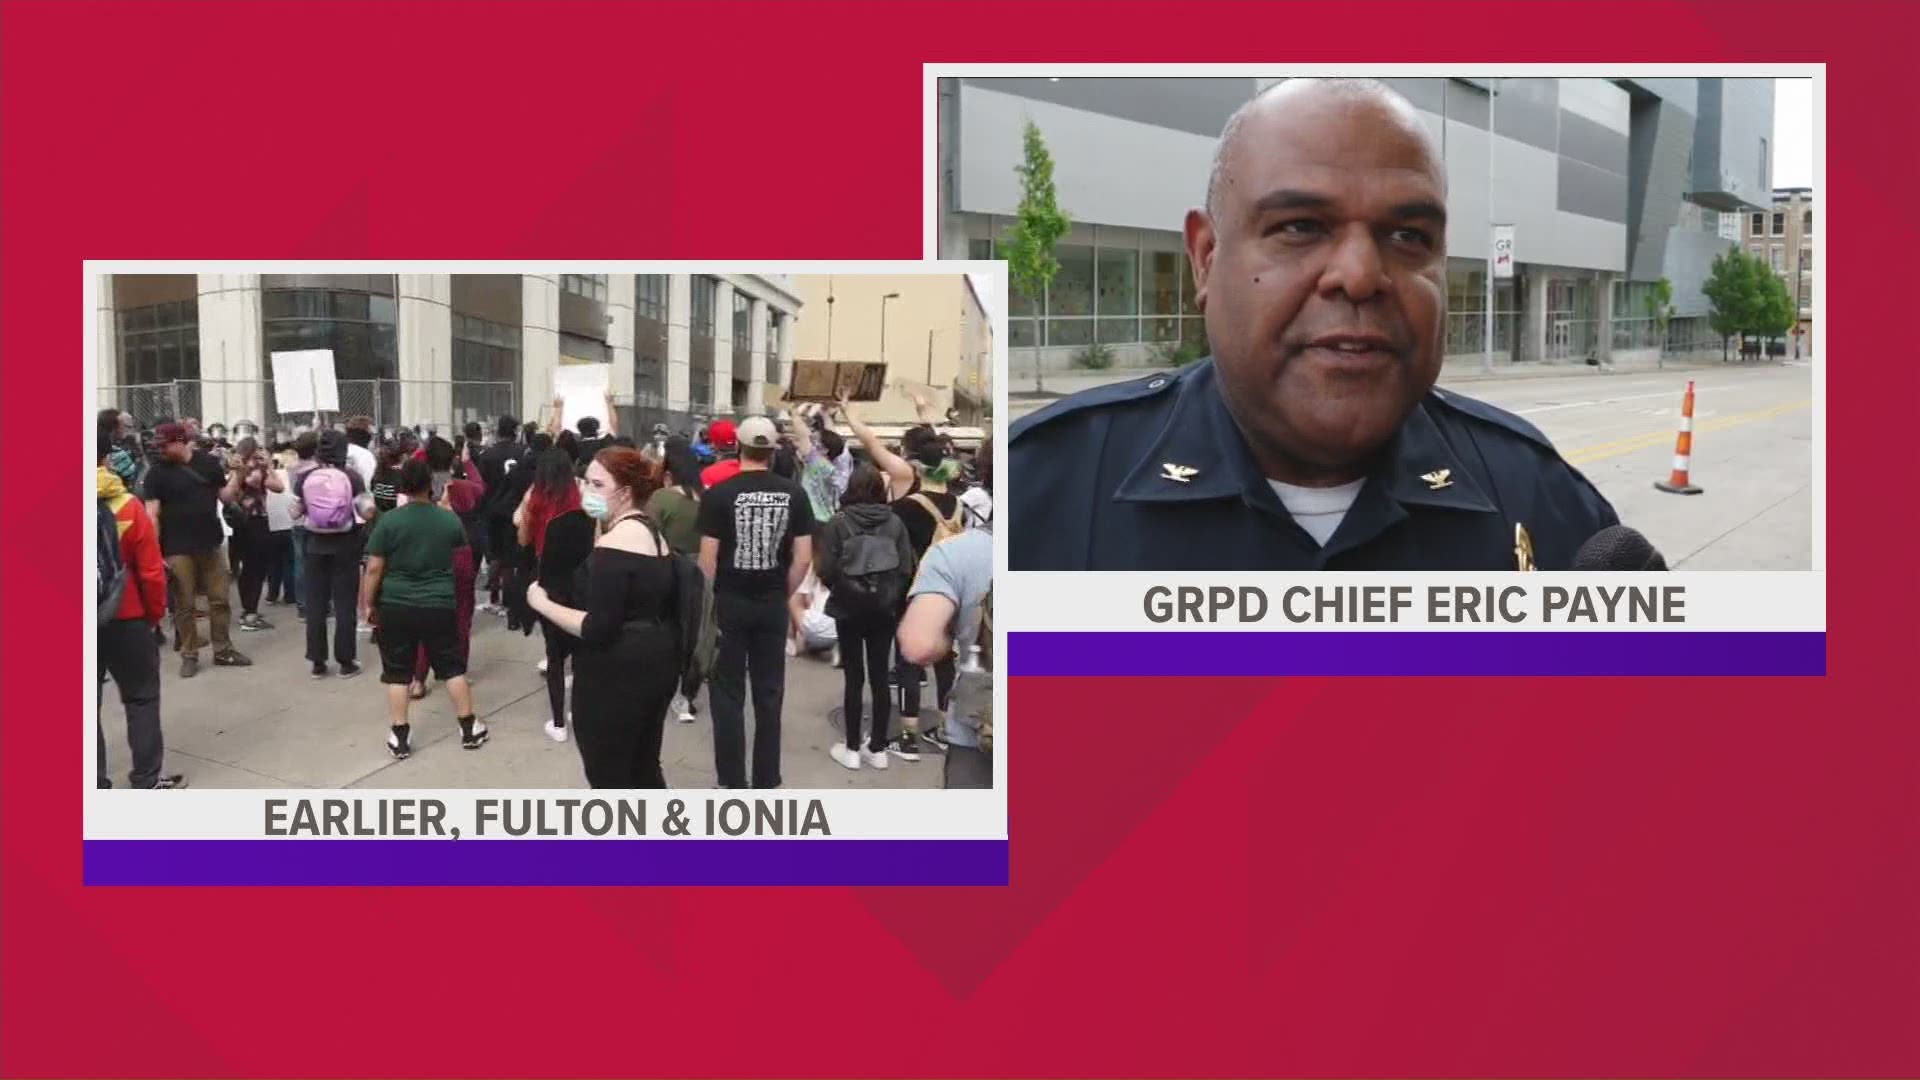 Grand Rapids Police Chief Eric Payne said that despite the call from protesters to join them, he won’t participate in an unpermitted rally.